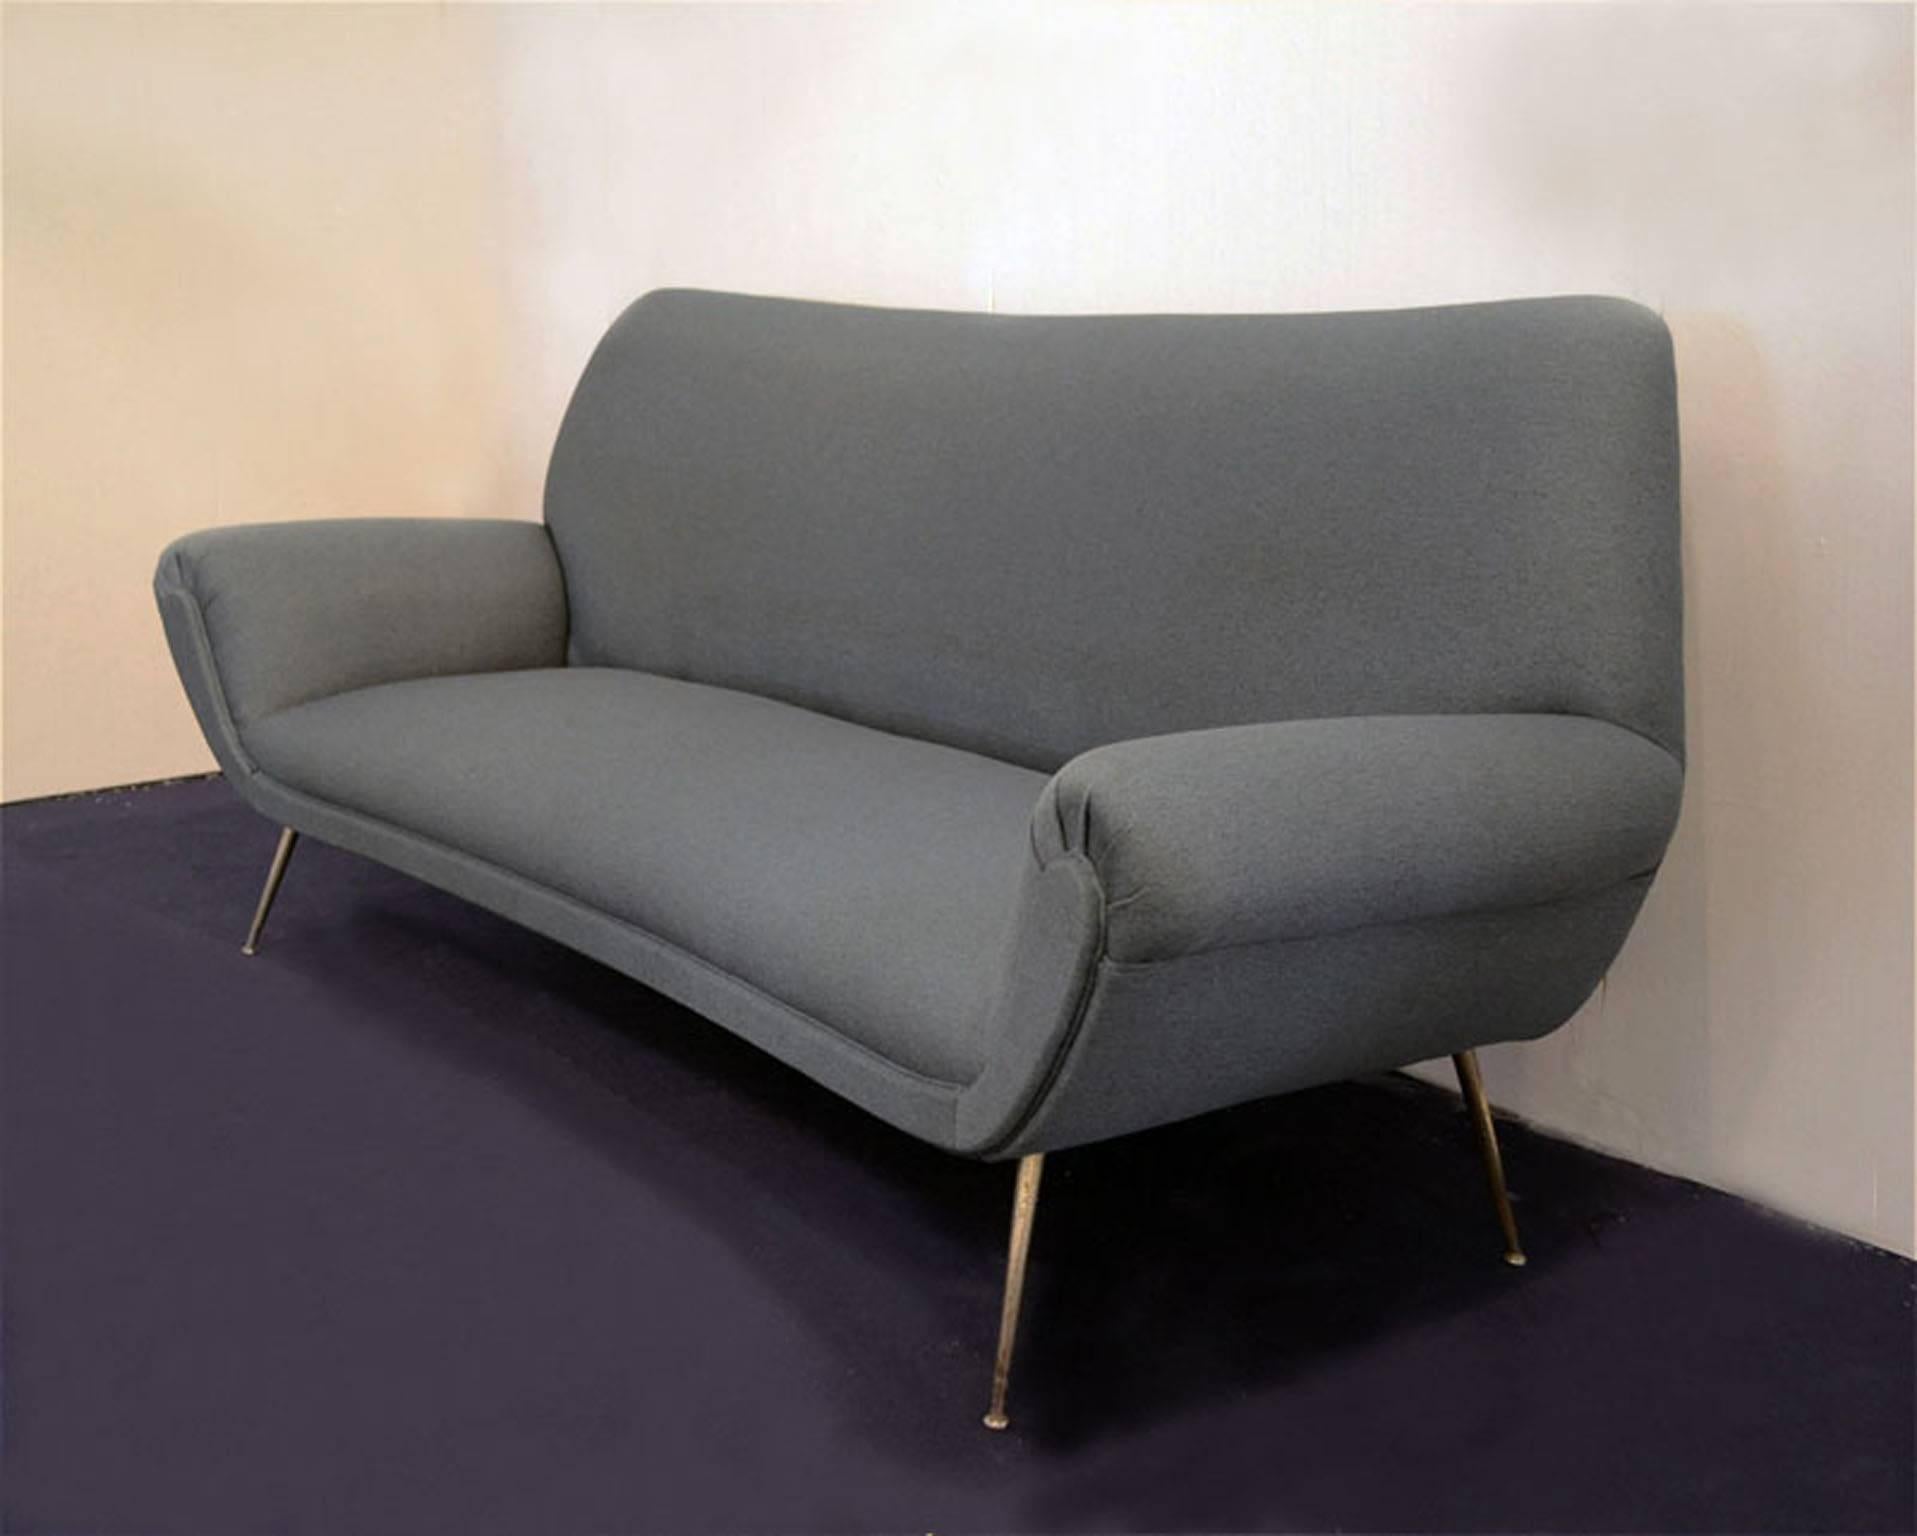 1950s Italian Three Seats Sofa by Isa Bergamo In Excellent Condition For Sale In Parma, IT